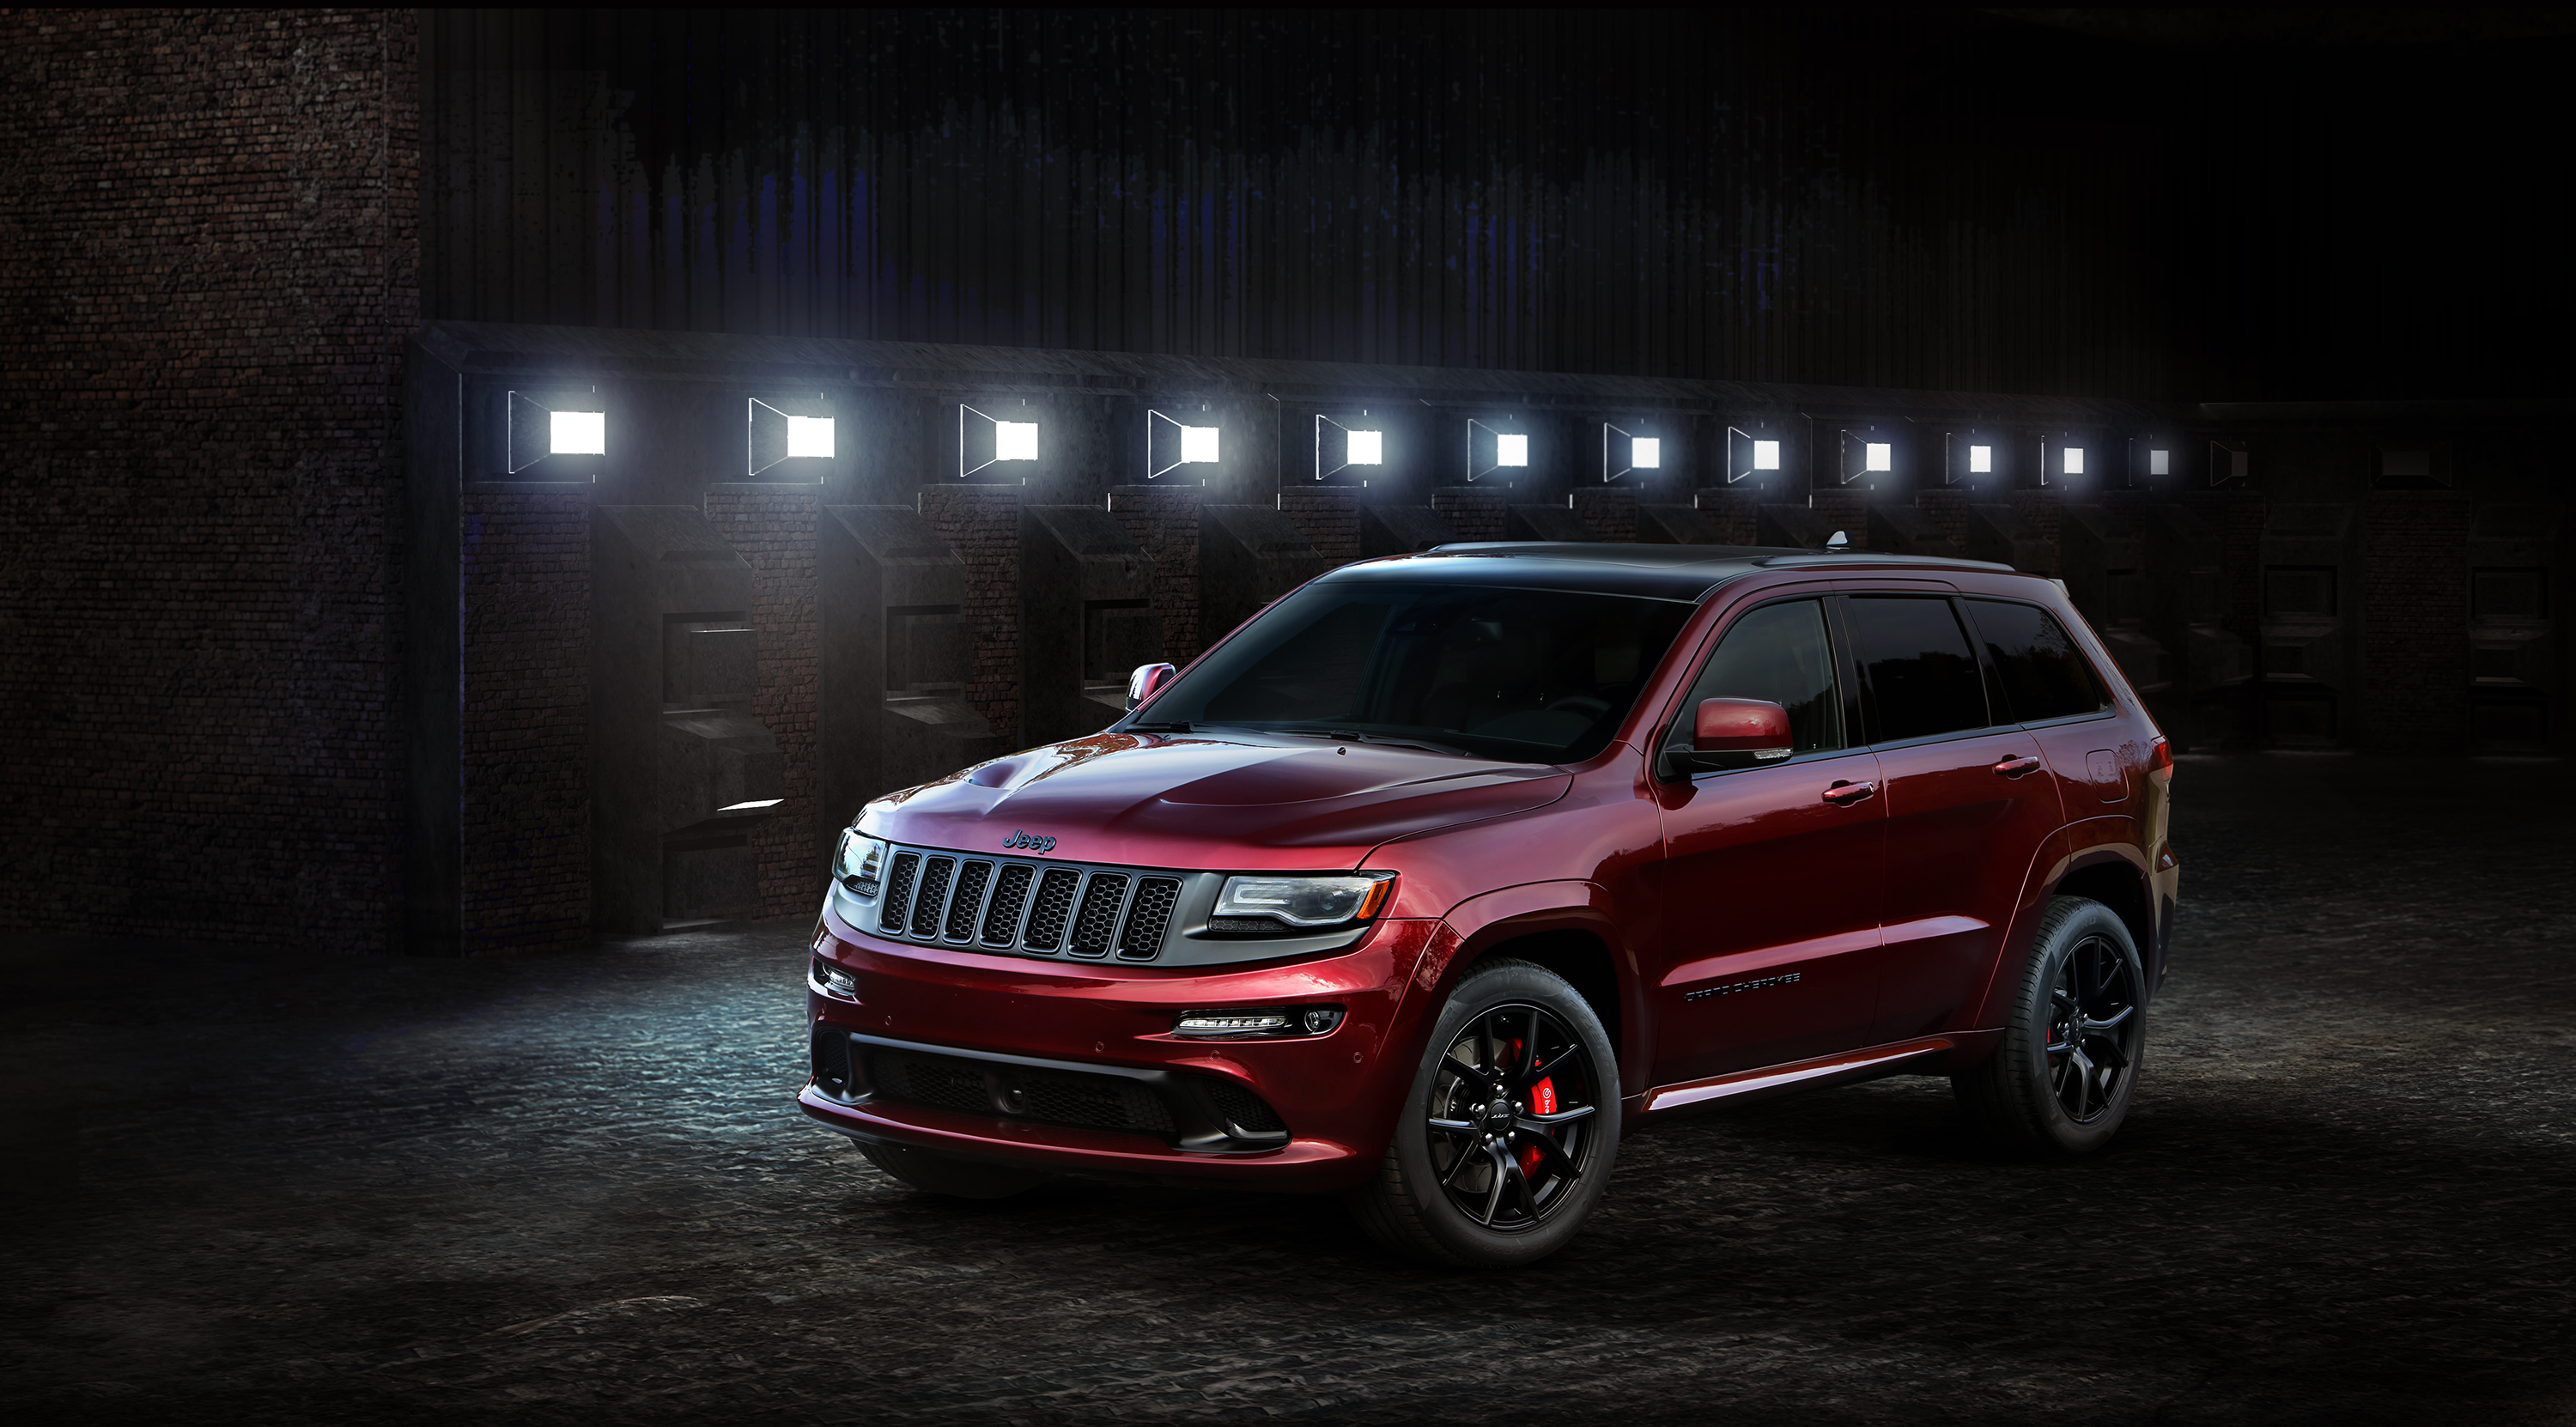 jeep grand cherokee, vehicles, jeep mobile wallpaper